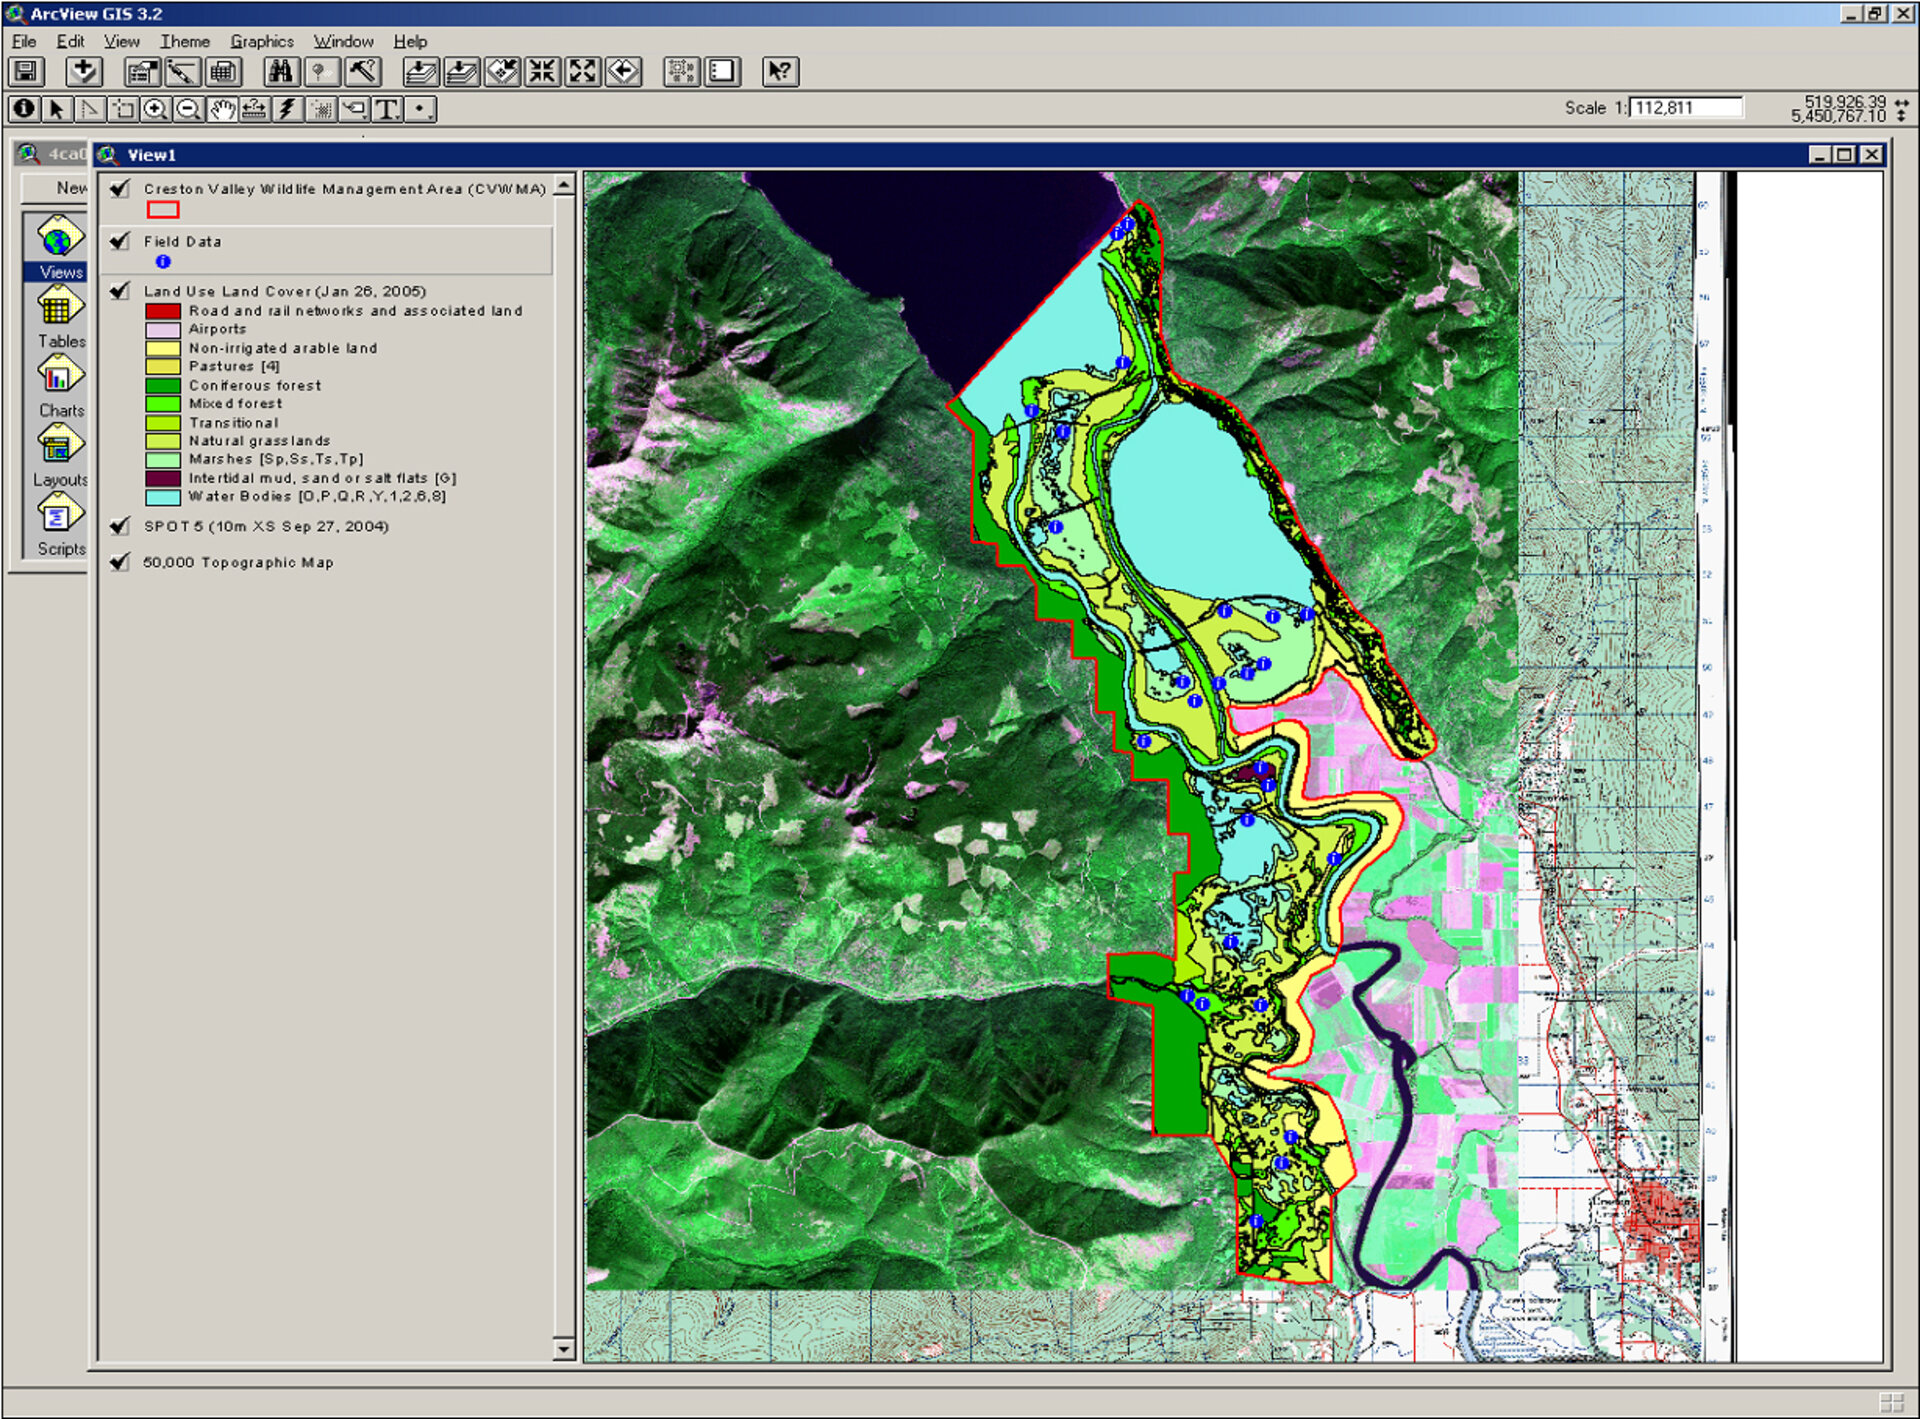 Wetland mapping is also supported